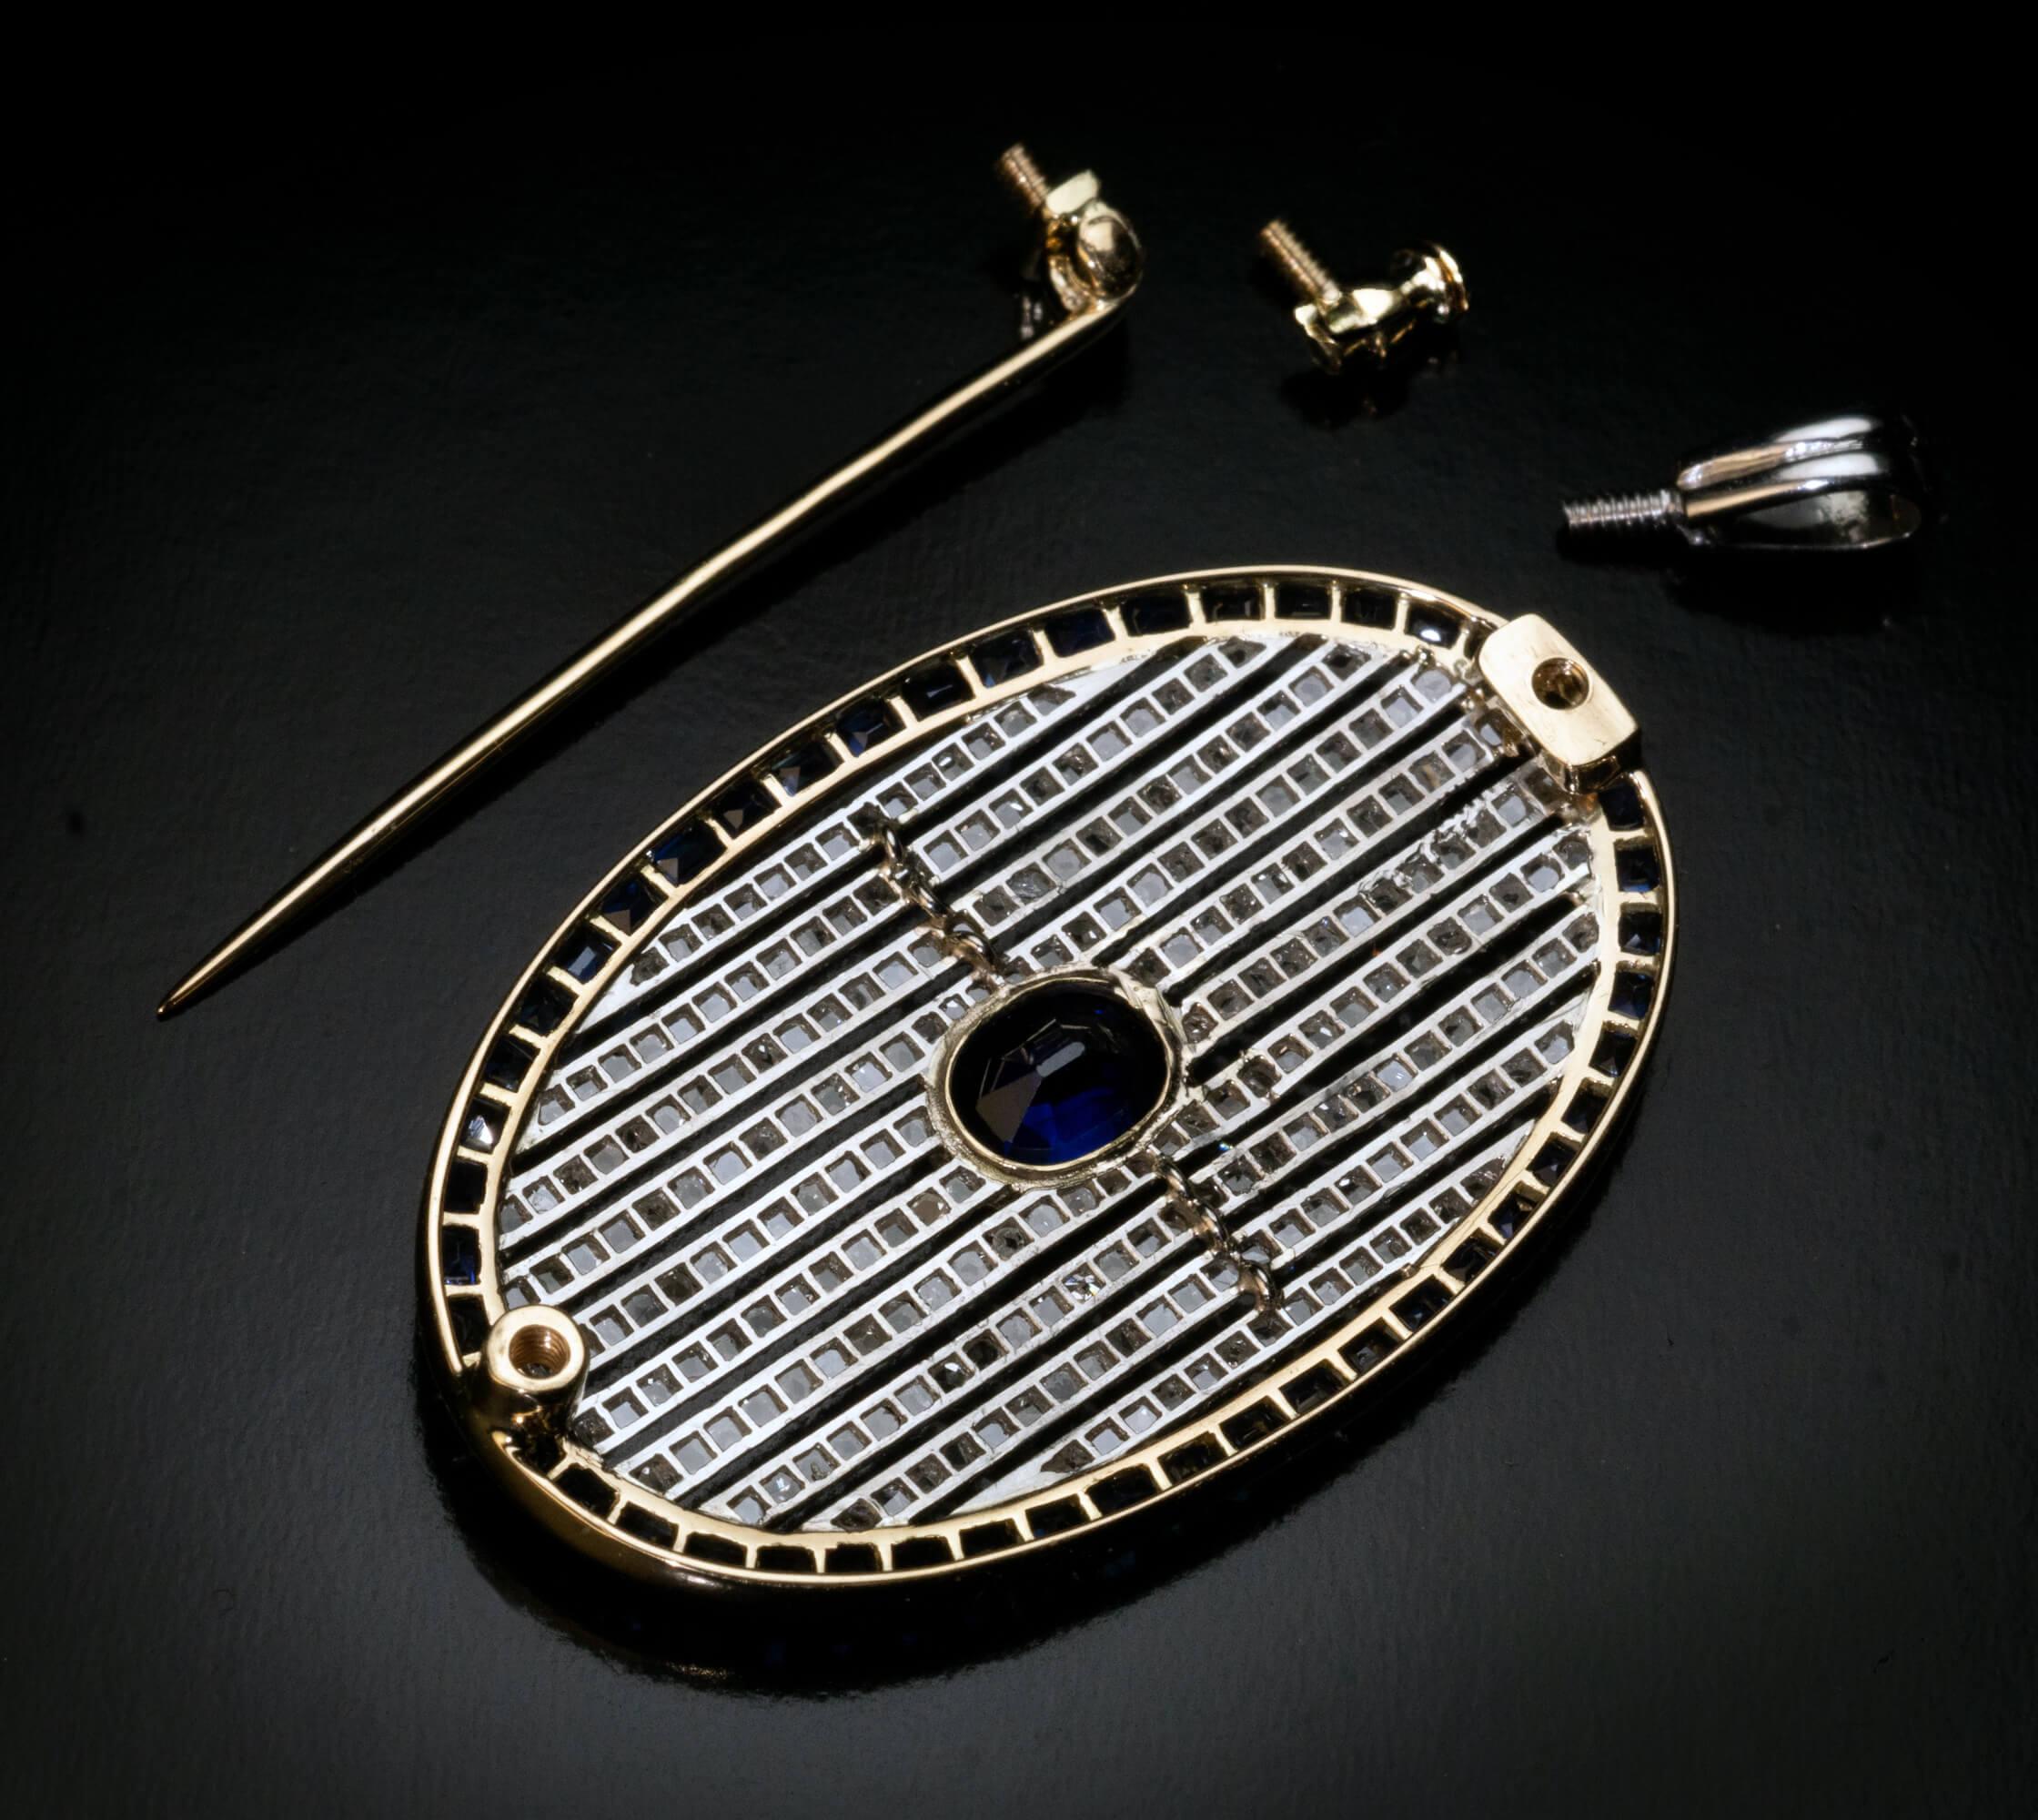 Circa 1910  This antique convertible brooch / pendant is finely crafted in yellow 14K gold and platinum. It features an excellent royal blue sapphire framed with rose cut diamonds within a calibre cut sapphire bezel.  The principal sapphire measures